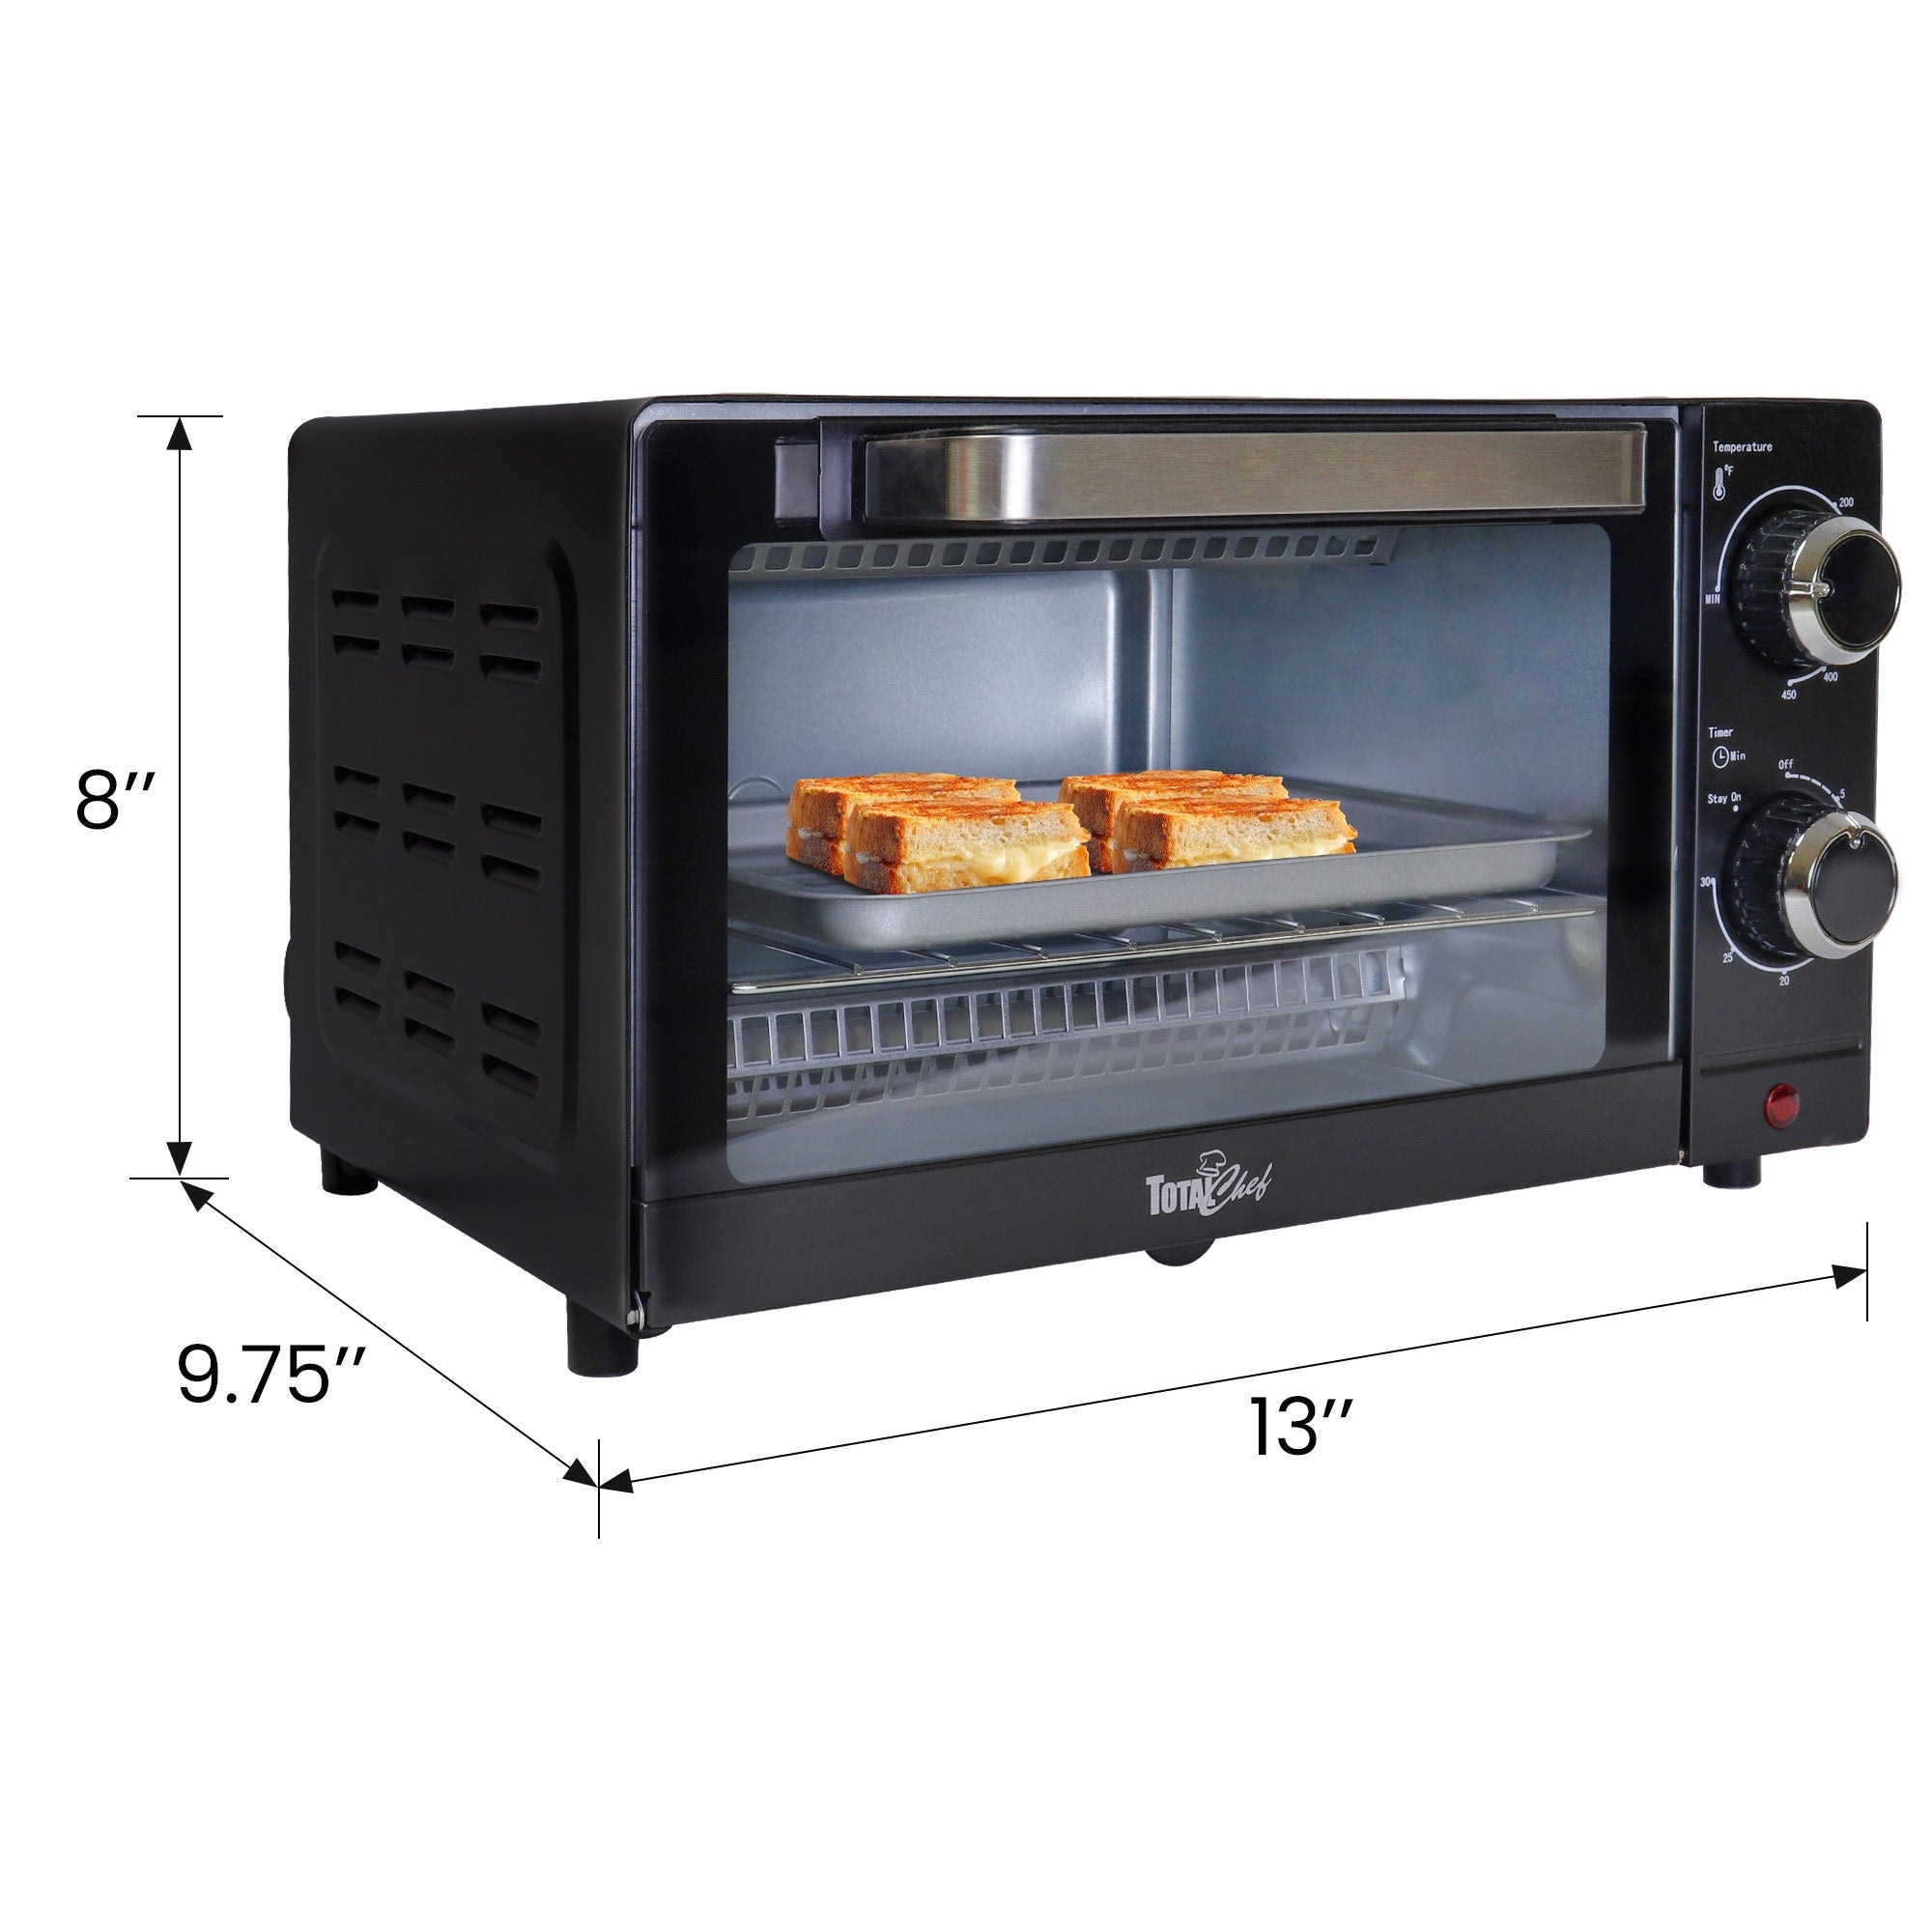 BLACK+DECKER 4-Slice Toaster Oven with Natural Convection